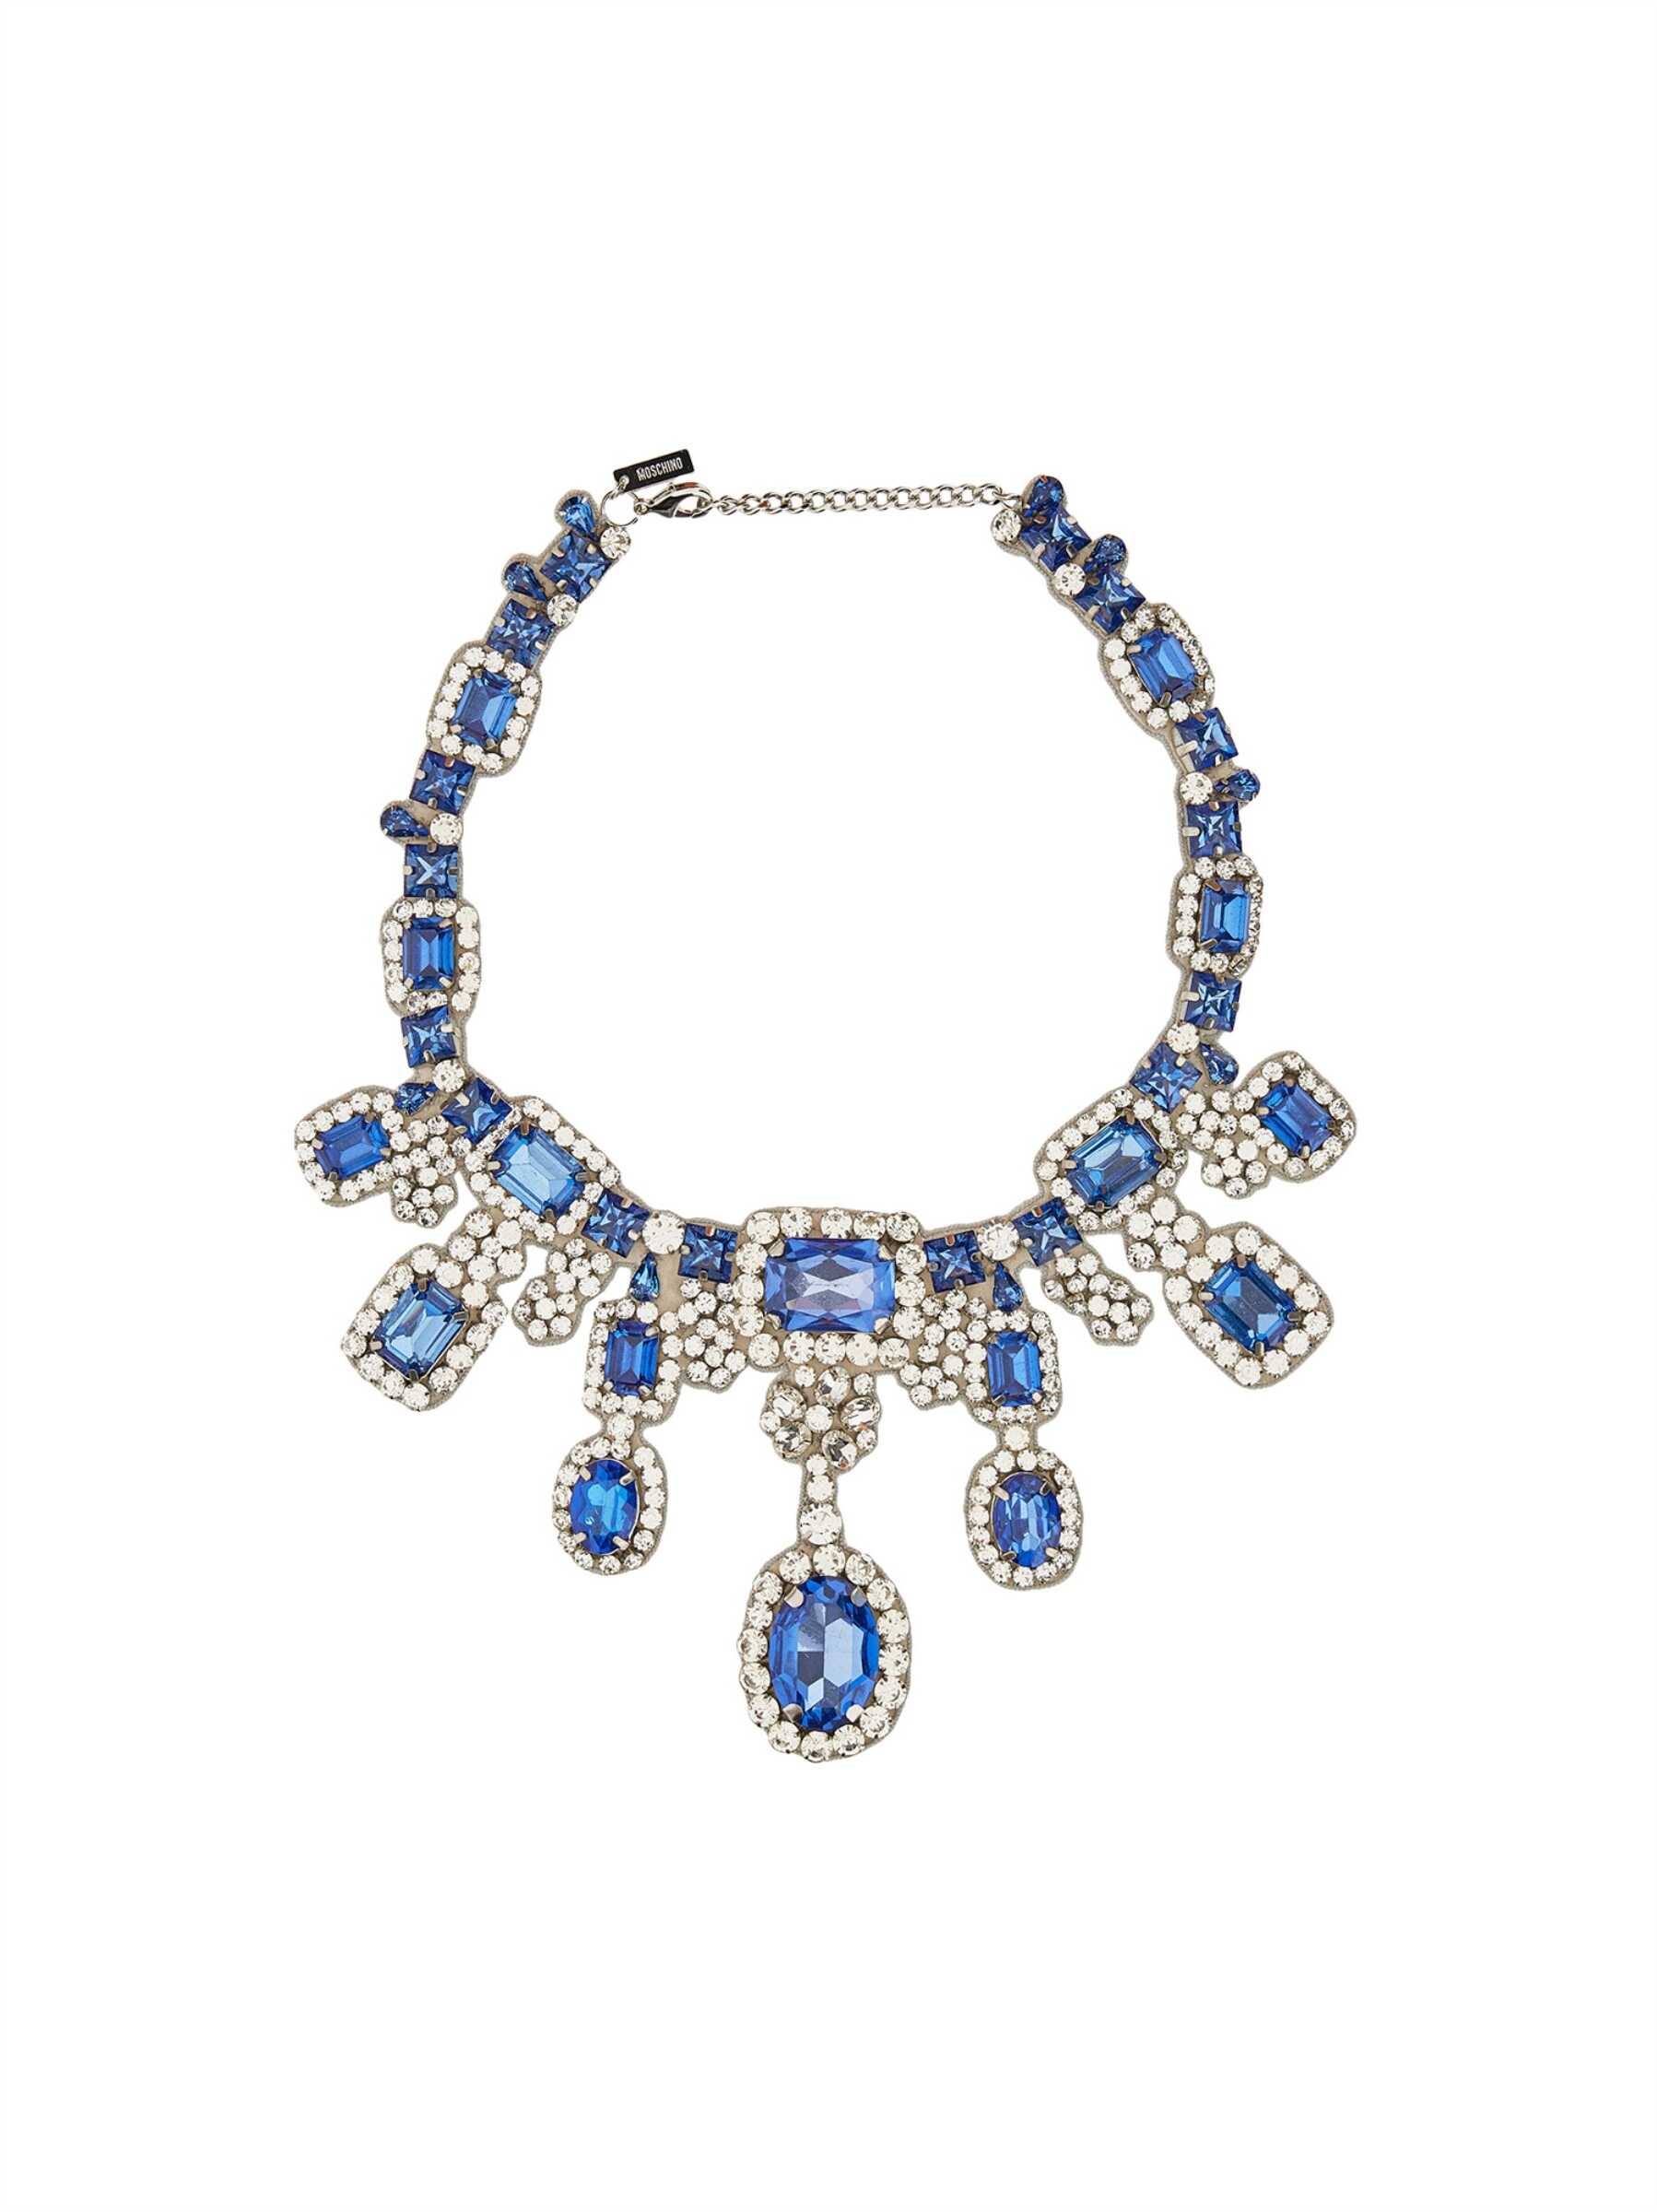 Moschino Necklace With Stones MULTICOLOUR image6